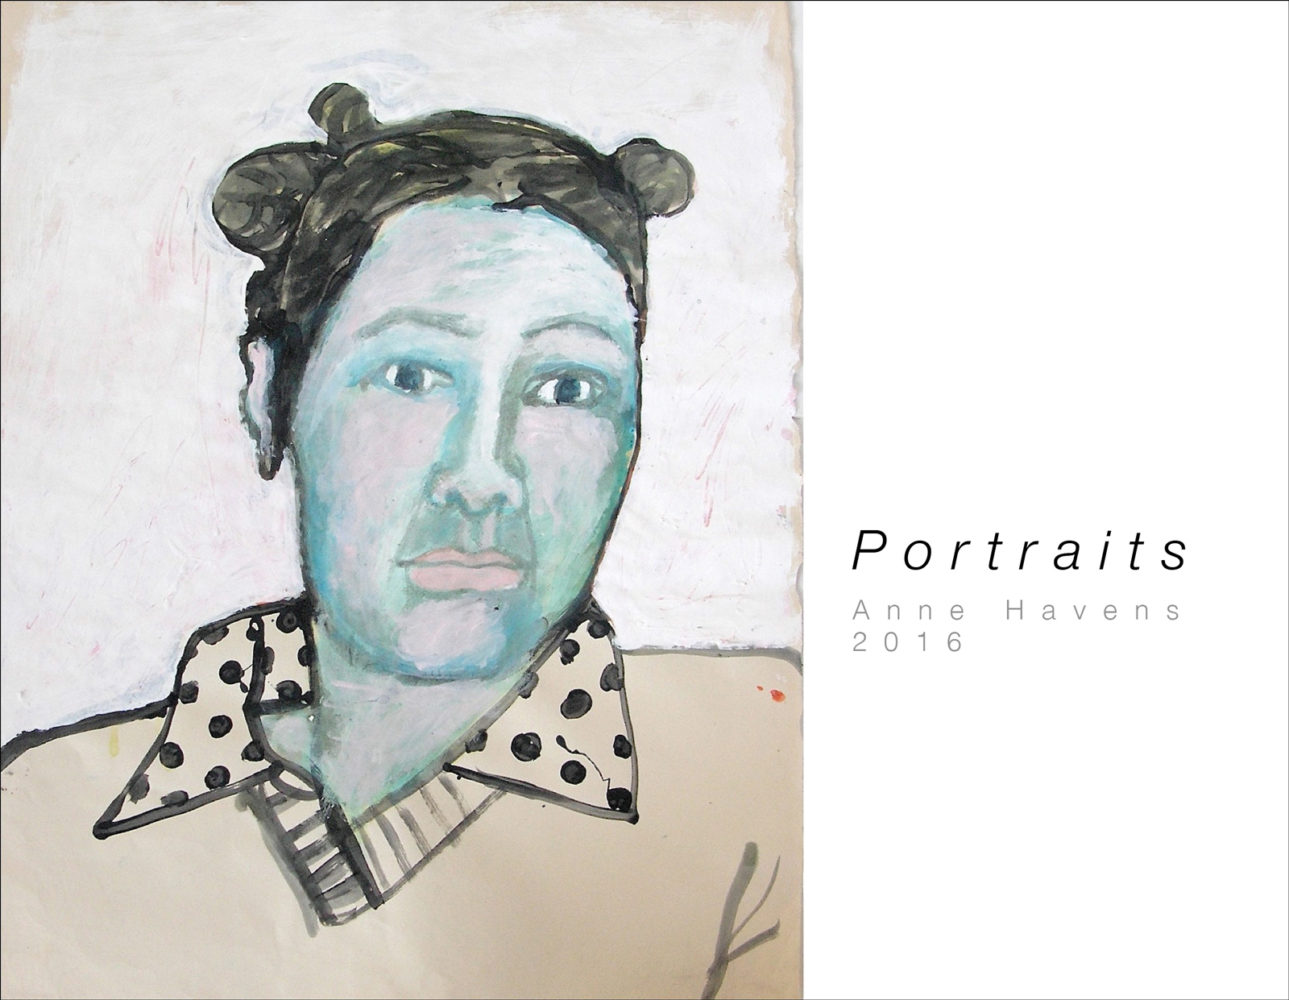 Cover of Anne Havens "Portraits" 2016